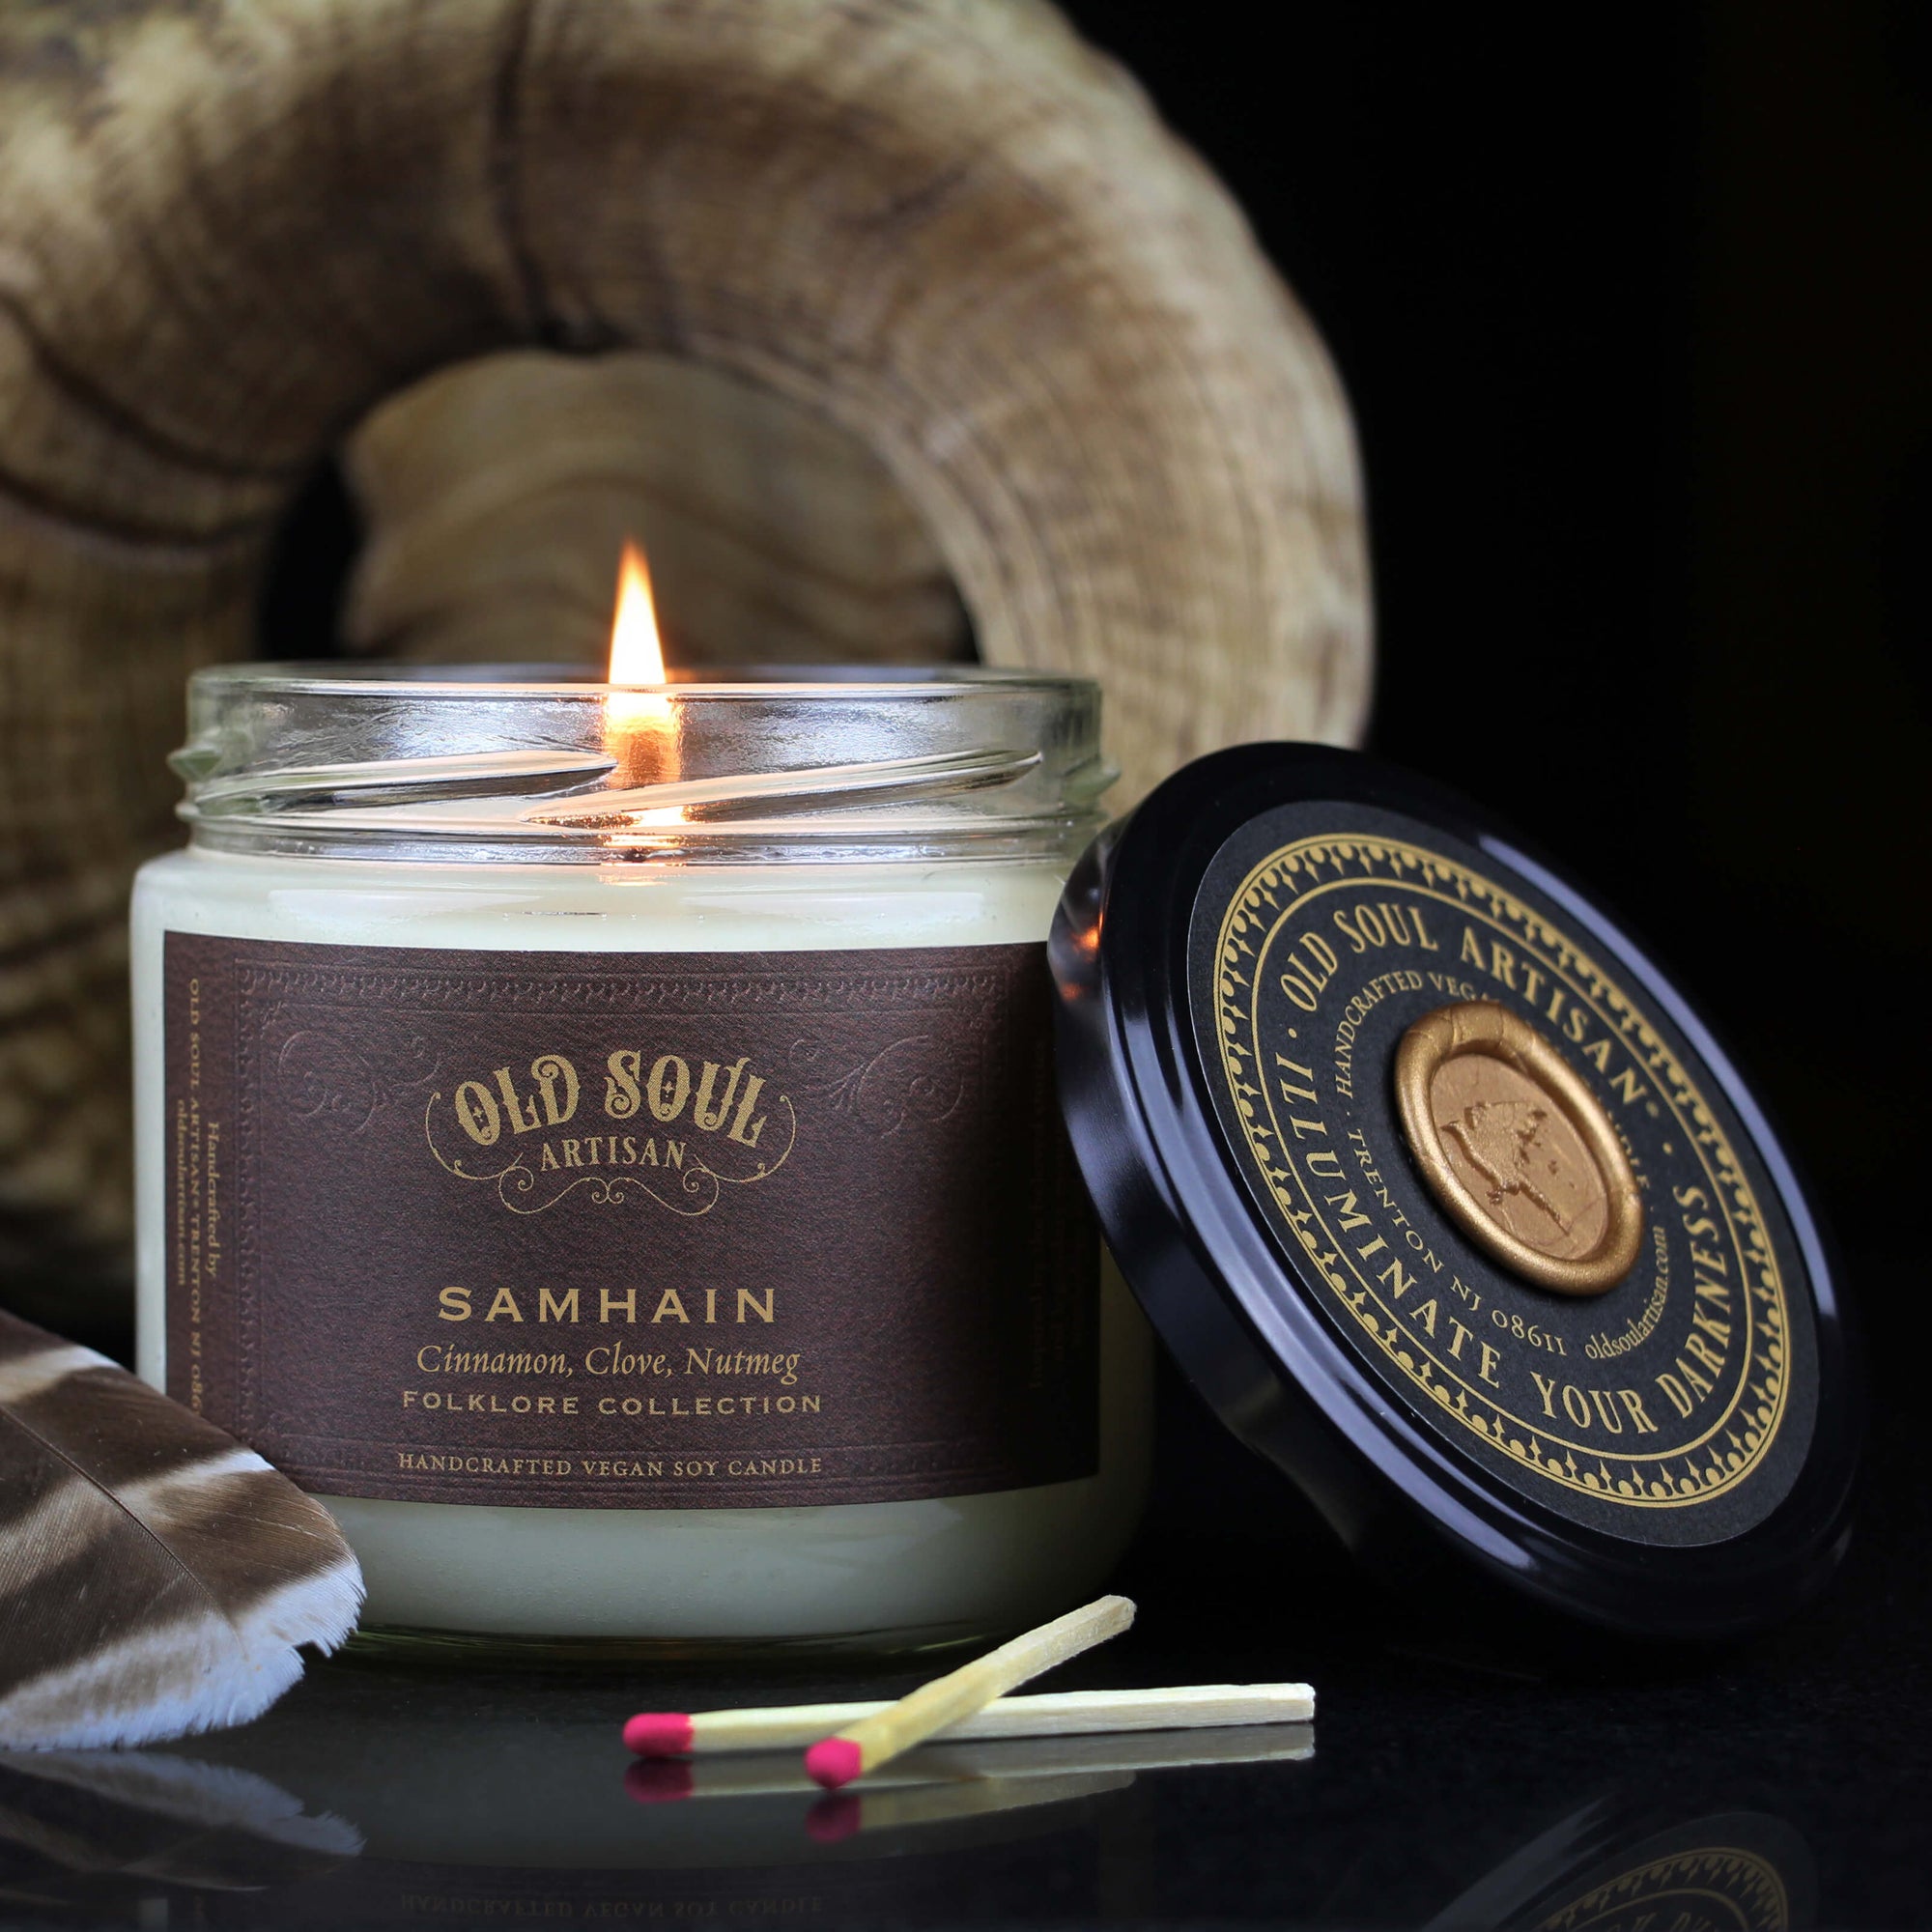 Samhain Soy Candle - Old Soul Artisan